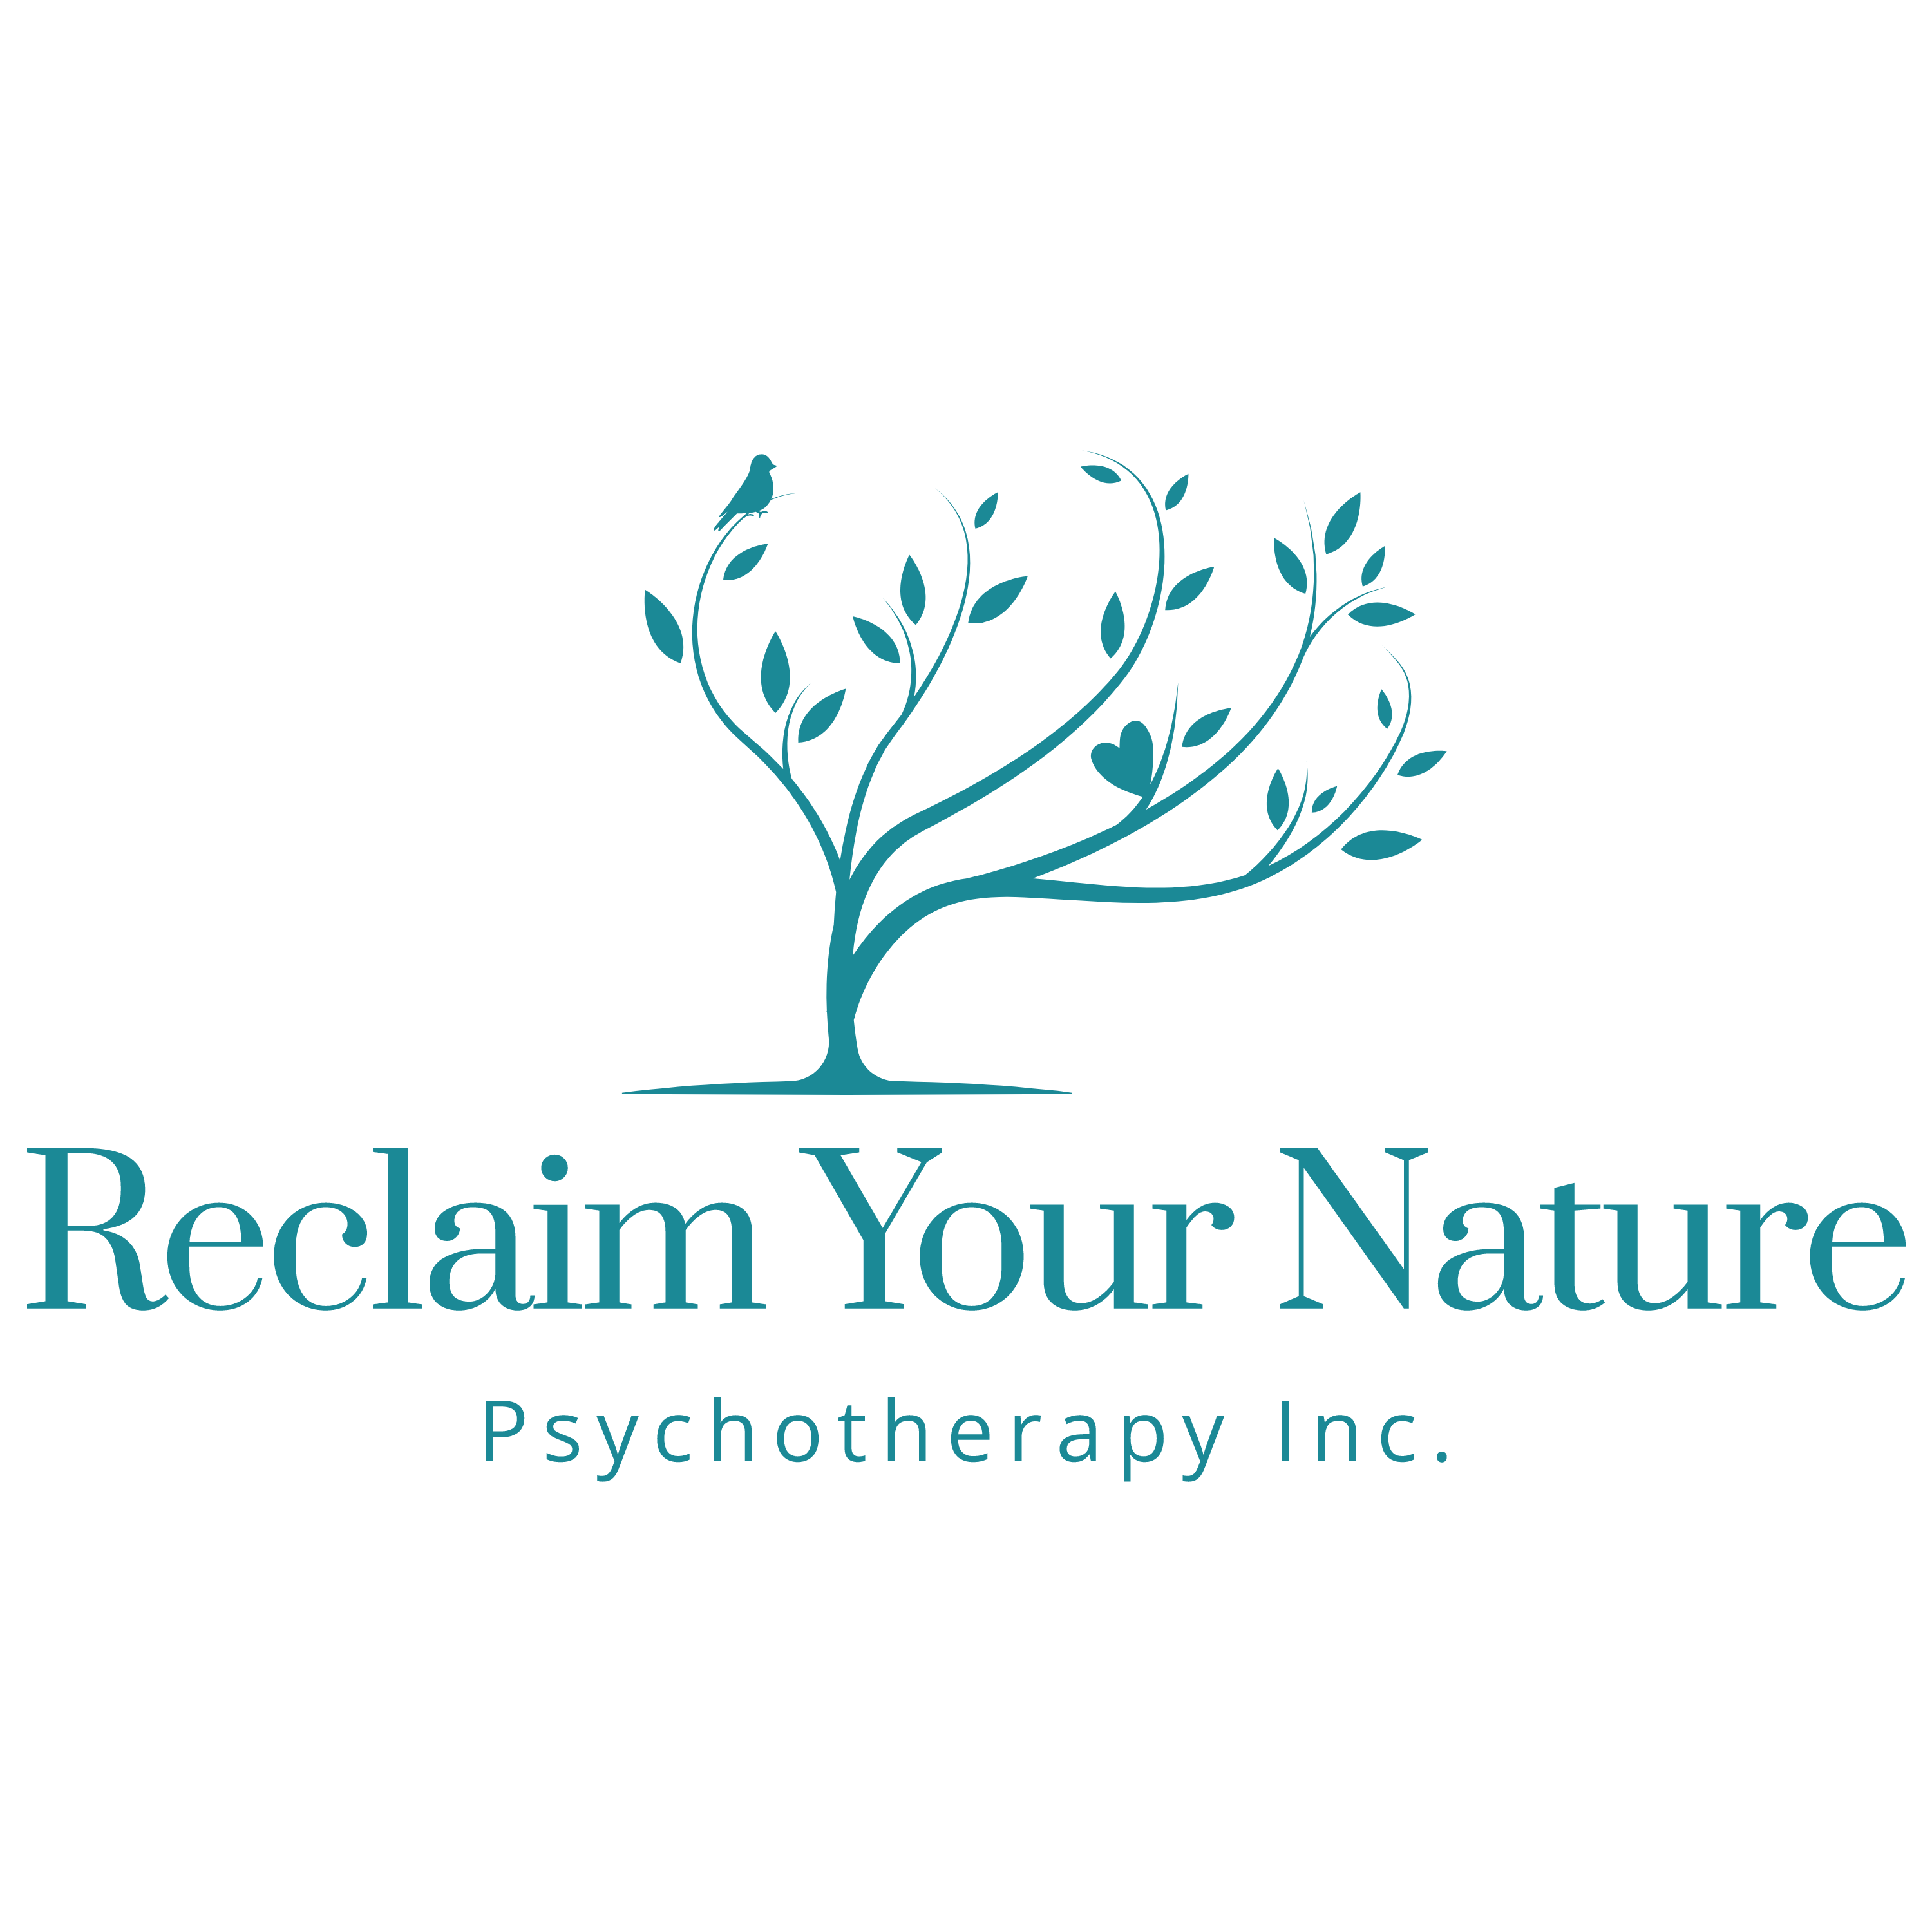 Reclaim Your Nature Psychotherapy Inc